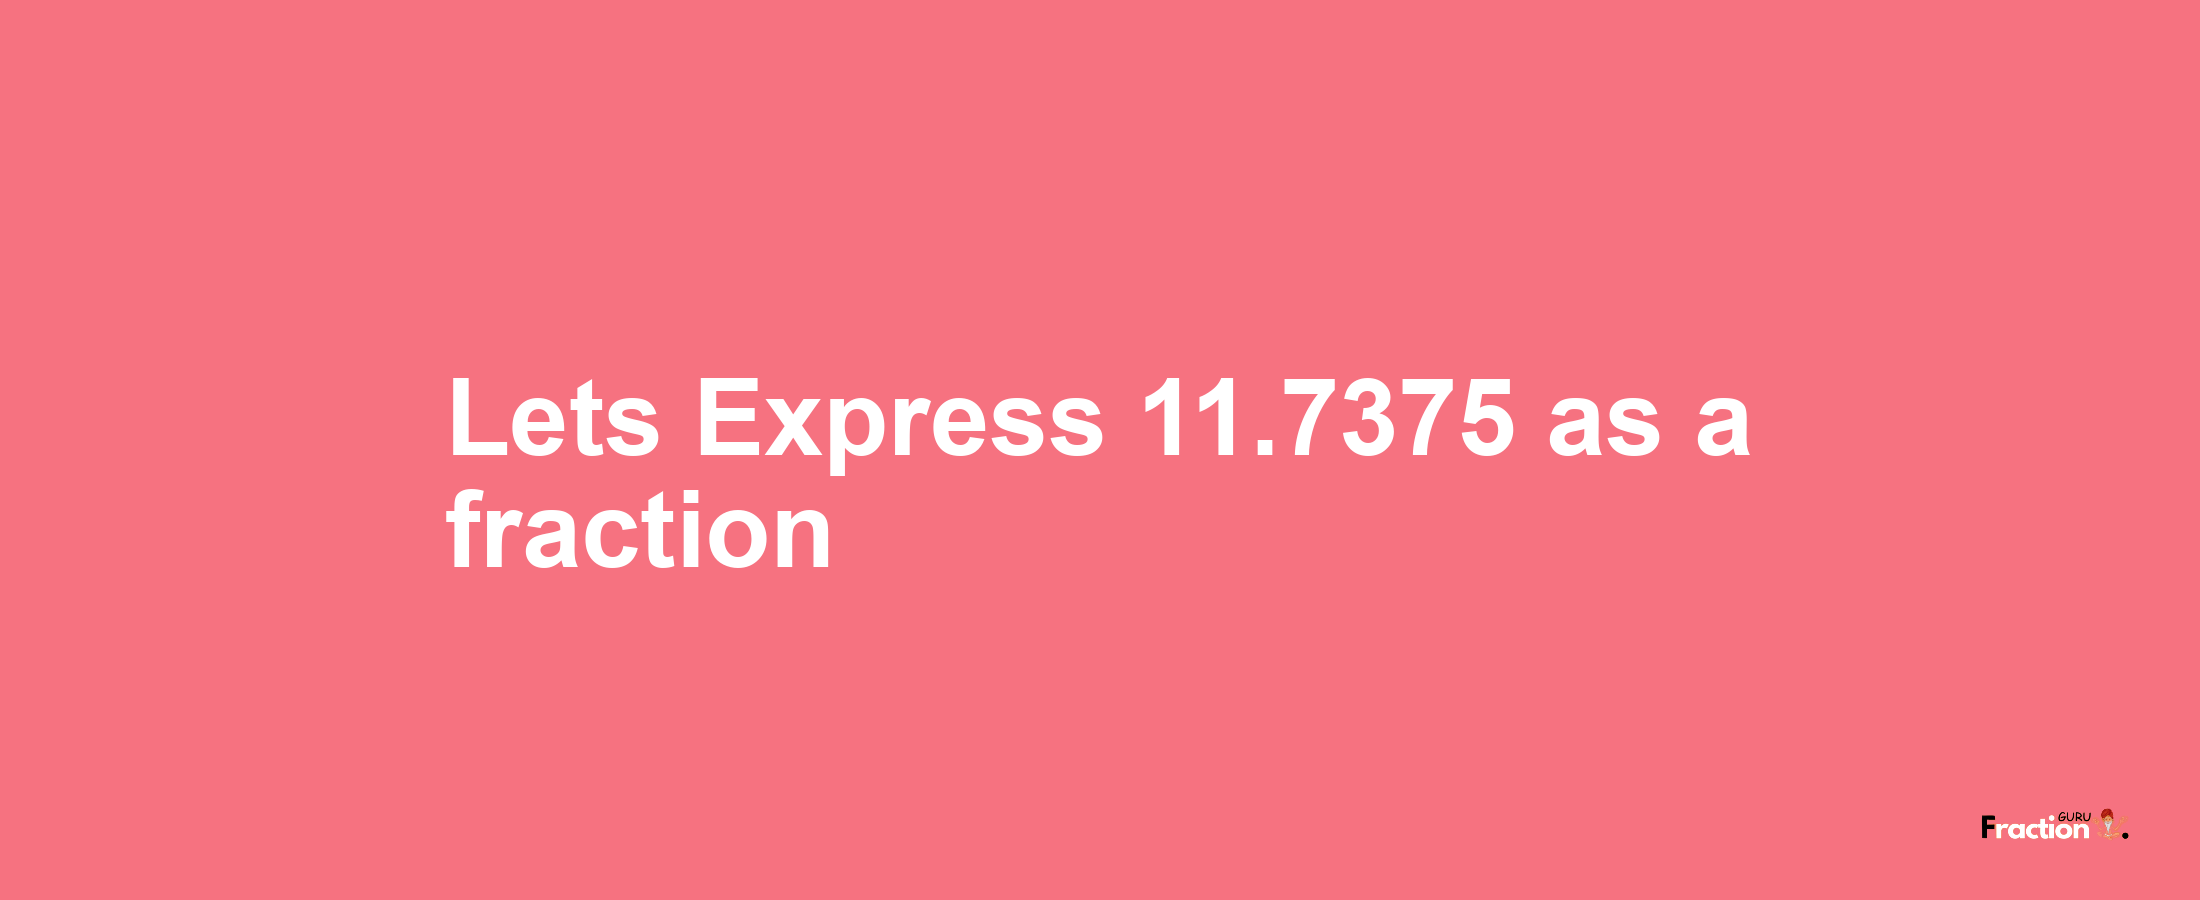 Lets Express 11.7375 as afraction